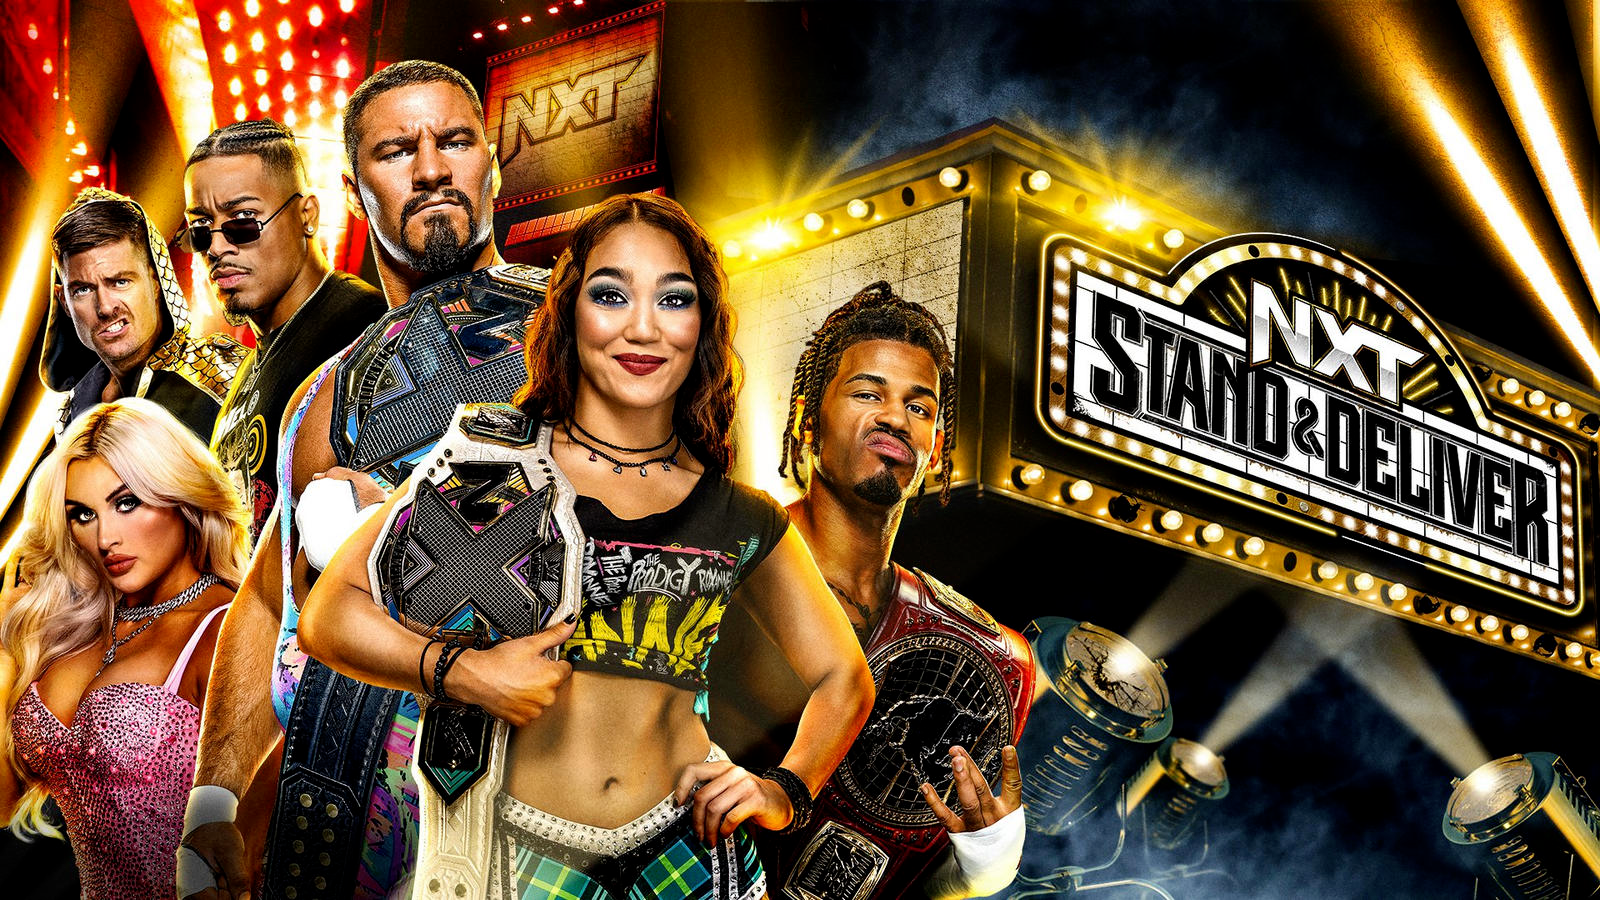 NXT Stand & Deliver featuring:  Grayson Waller, Carmello Hayes, NXT Champion Bron Breakker, Tiffany Stratton, NXT Women's Champion Roxanne Perez and NXT North American Champion Wes Lee